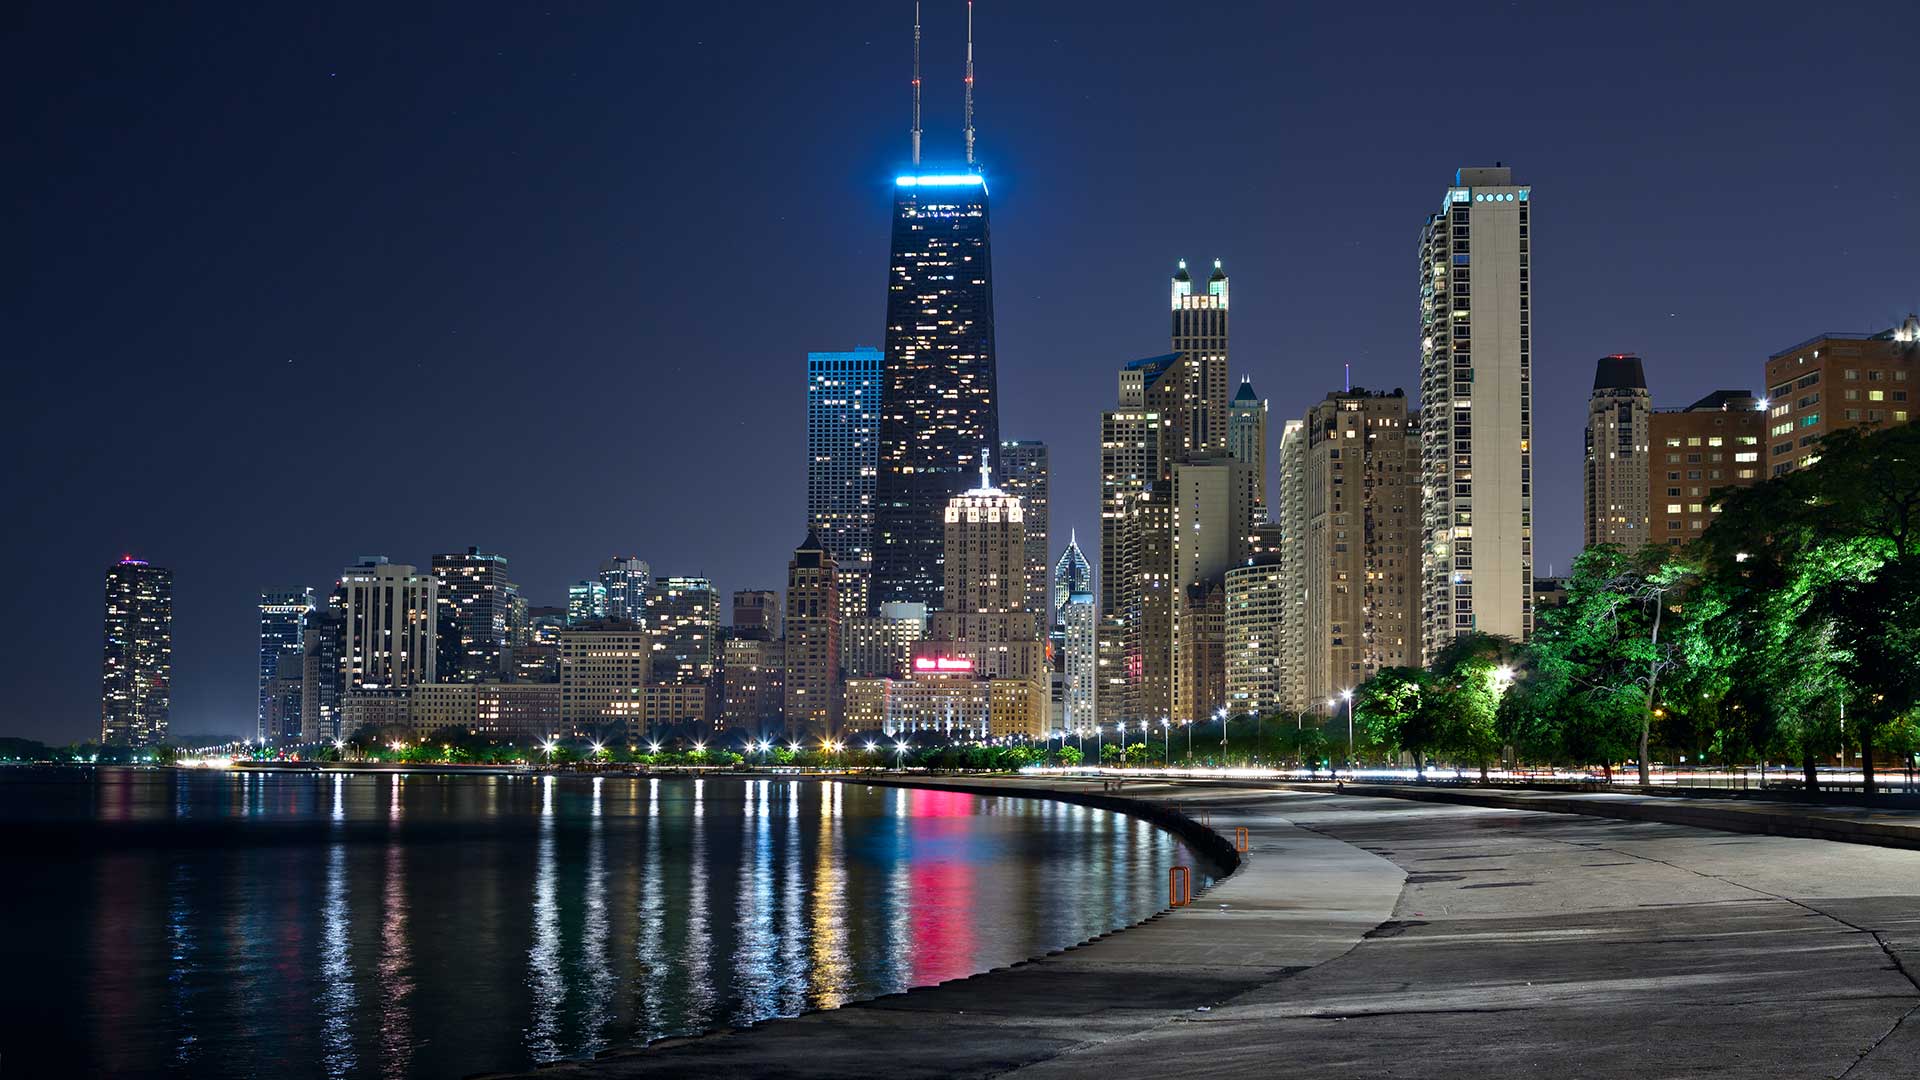 Looking south towards downtown Chicago from along Lake Shore Drive and the Gold Coast at night. The skyline is lit up with many colorful lights.